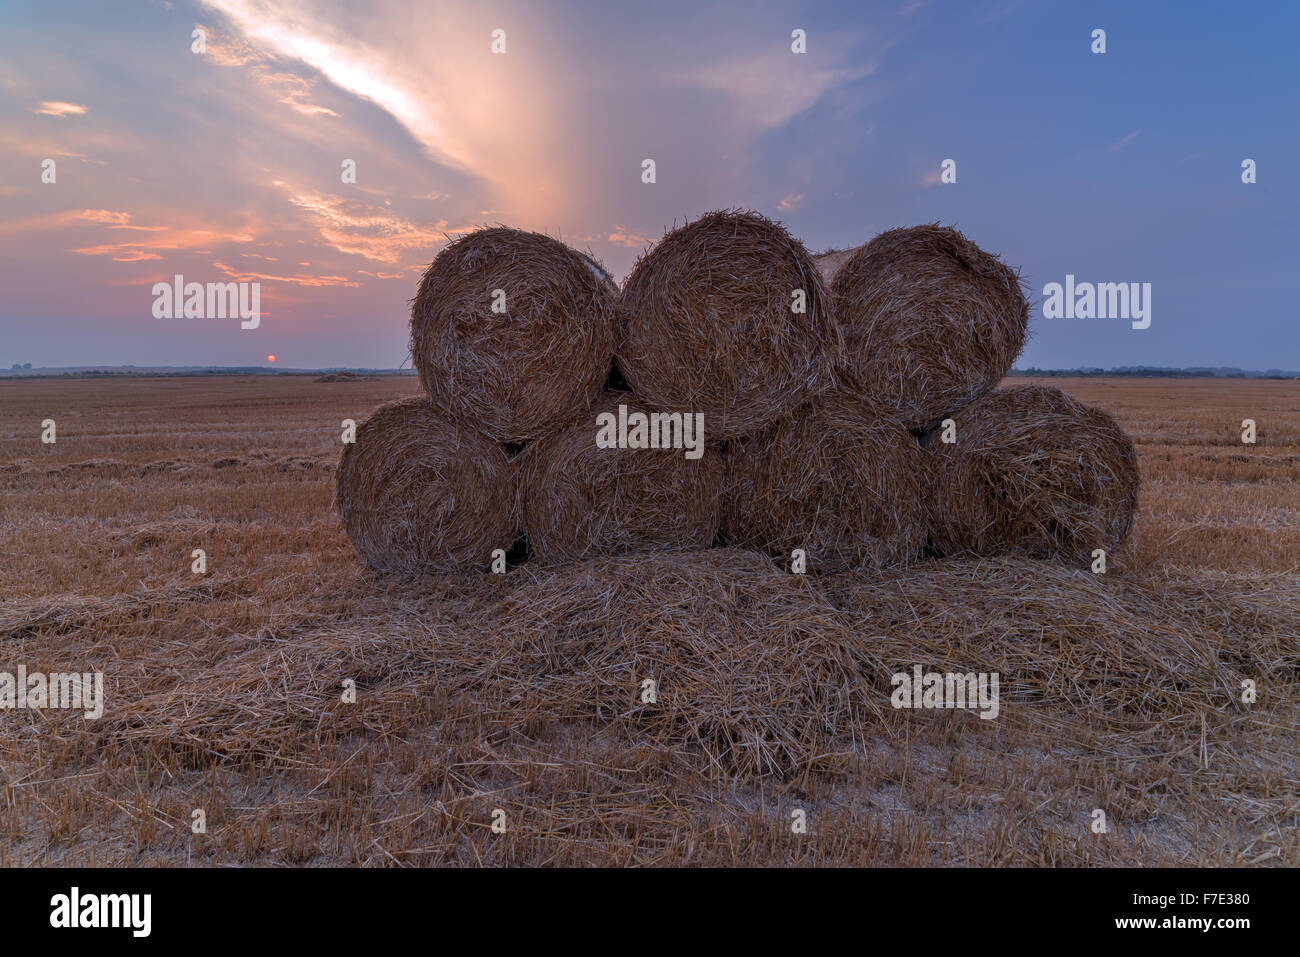 Amazing rural scene on autumn field with straw roles and dramatic evening light. Stock Photo